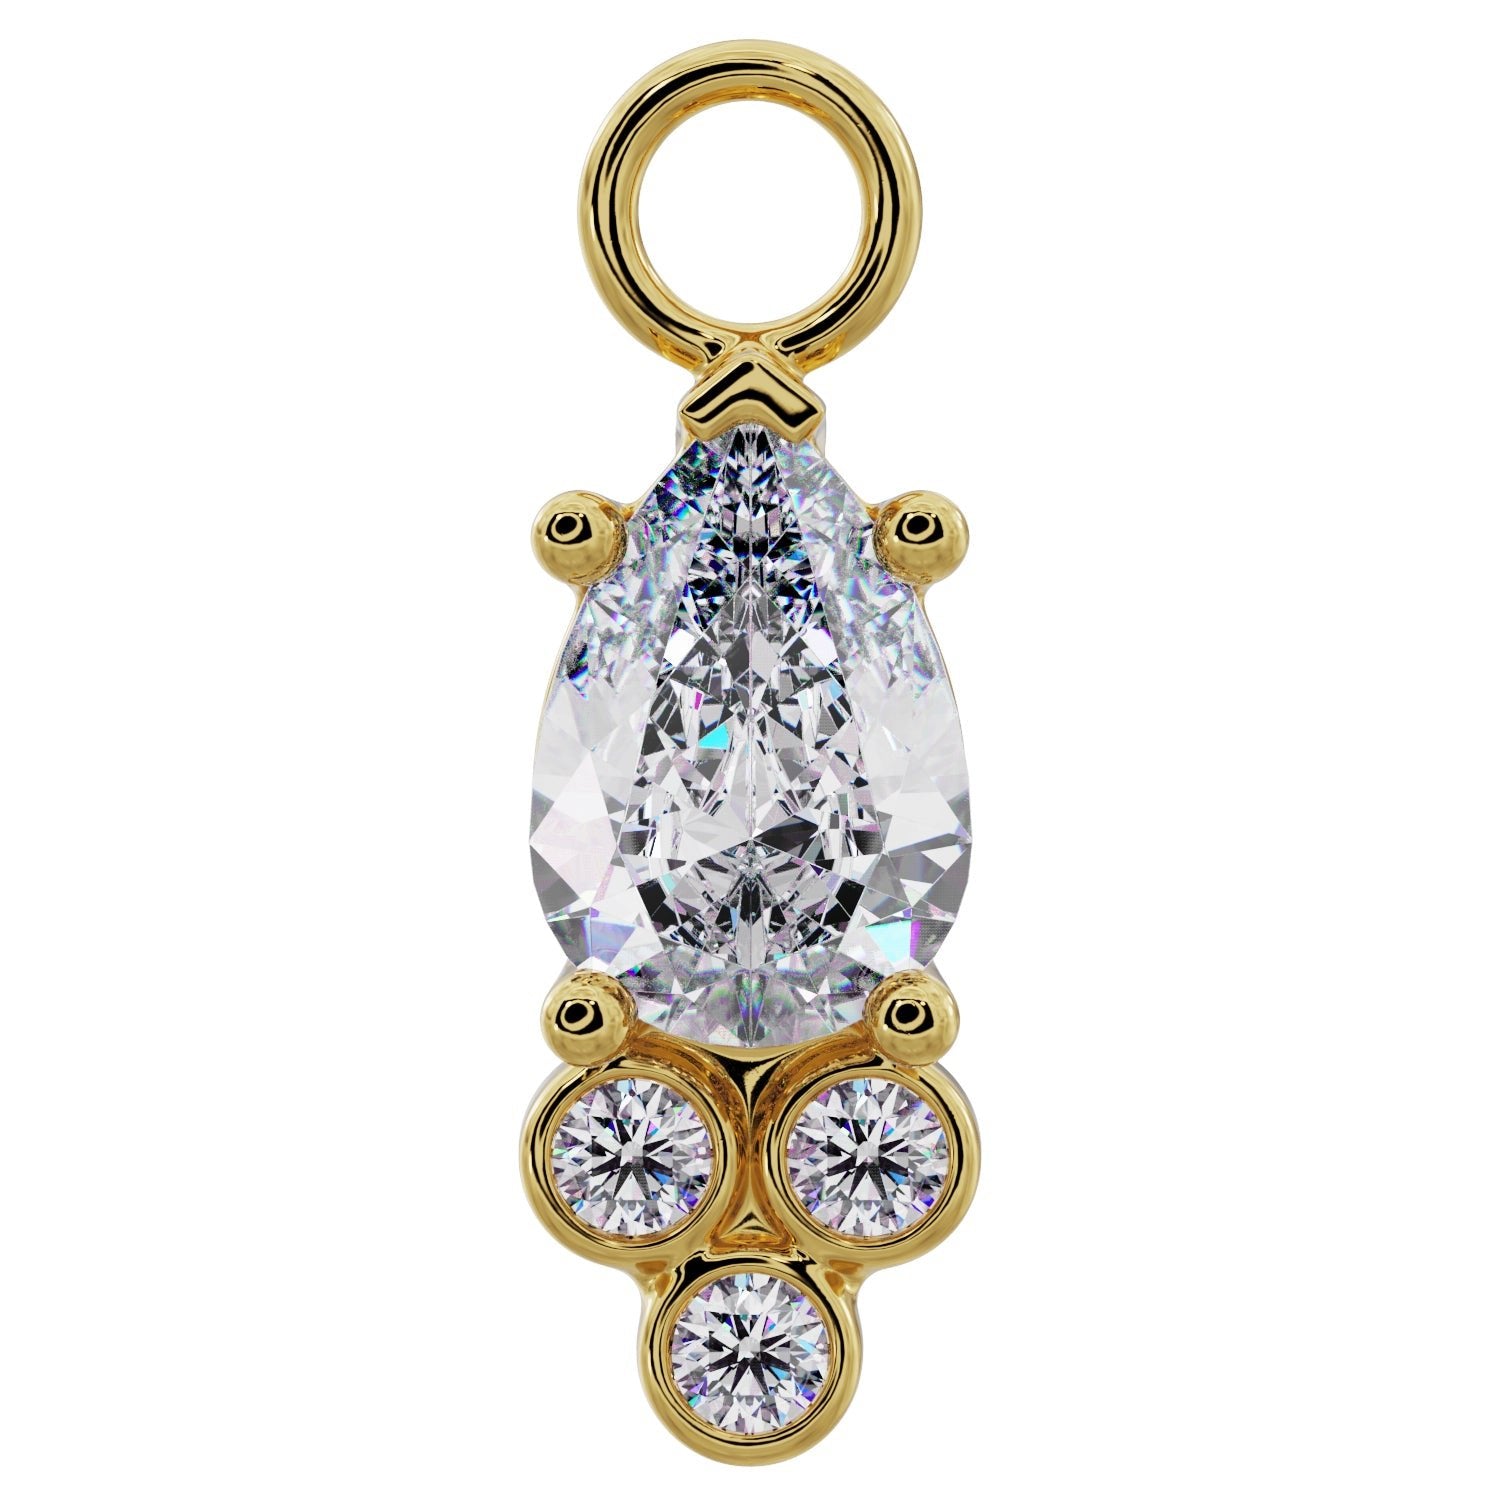 Pear with Tiny Diamonds Charm Accessory for Piercing Jewelry-Cubic Zirconia   14K Yellow Gold